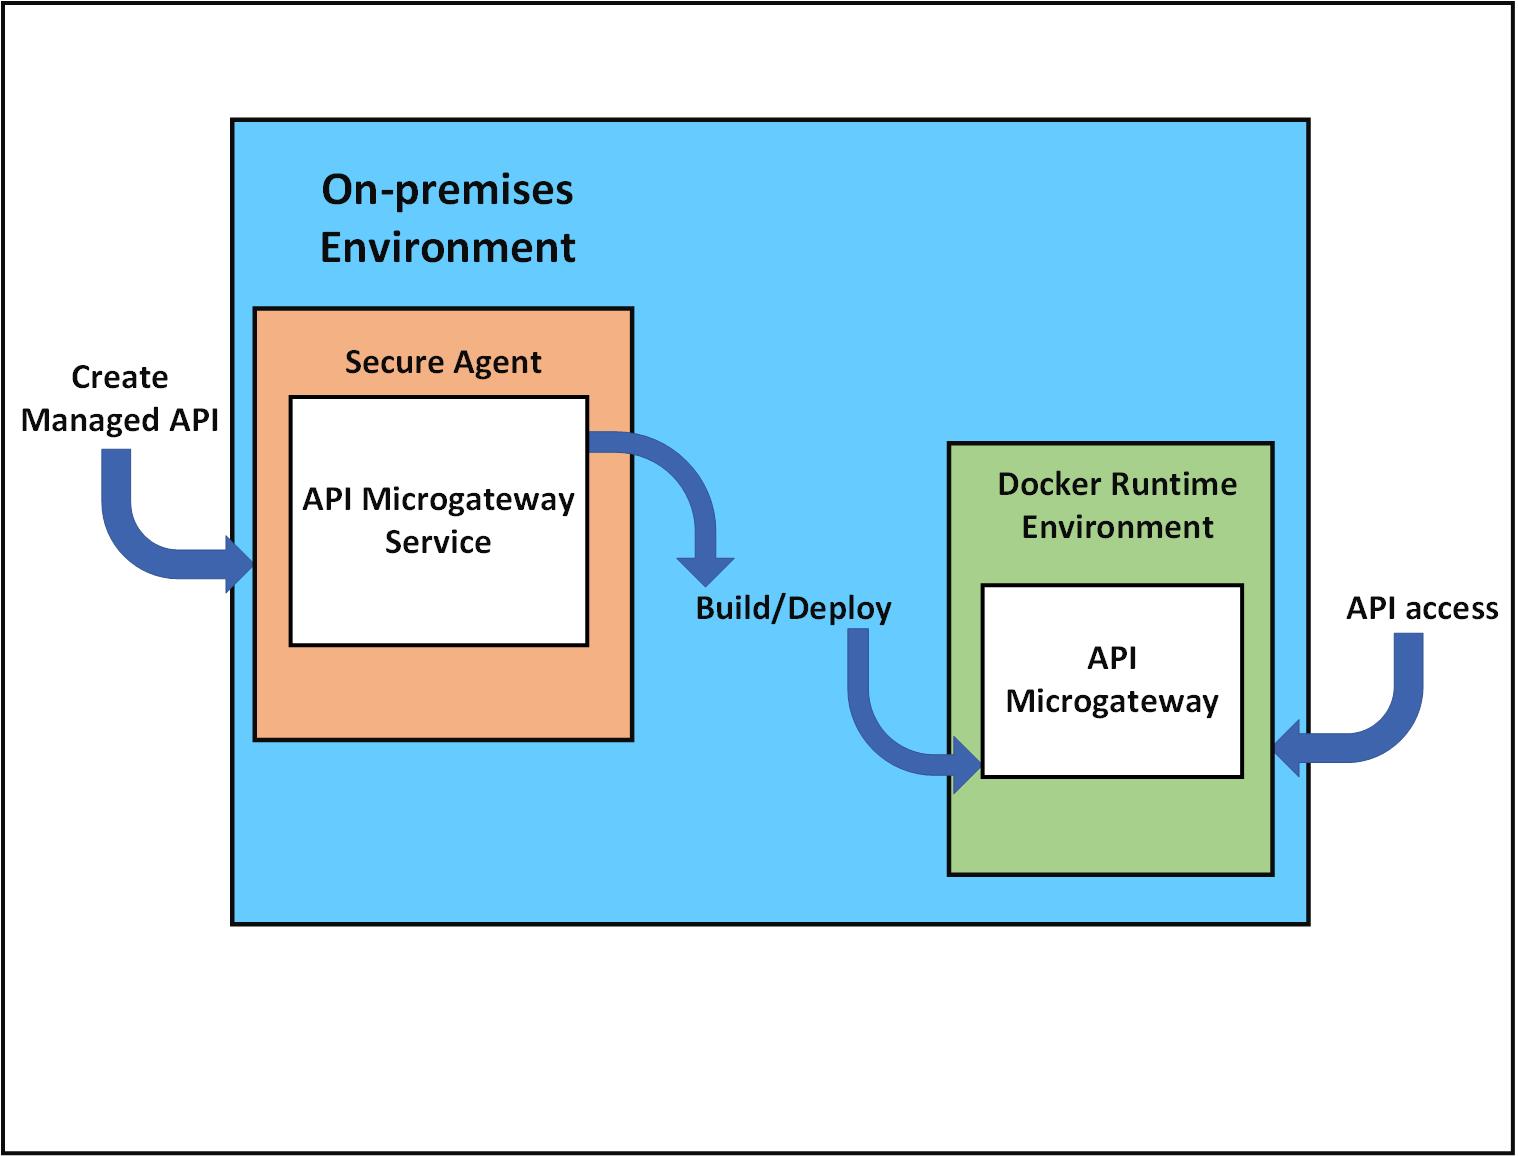 The flow diagram shows the API Microgateway Service and API Microgateway components exposing a managed API in the on-premises environment.